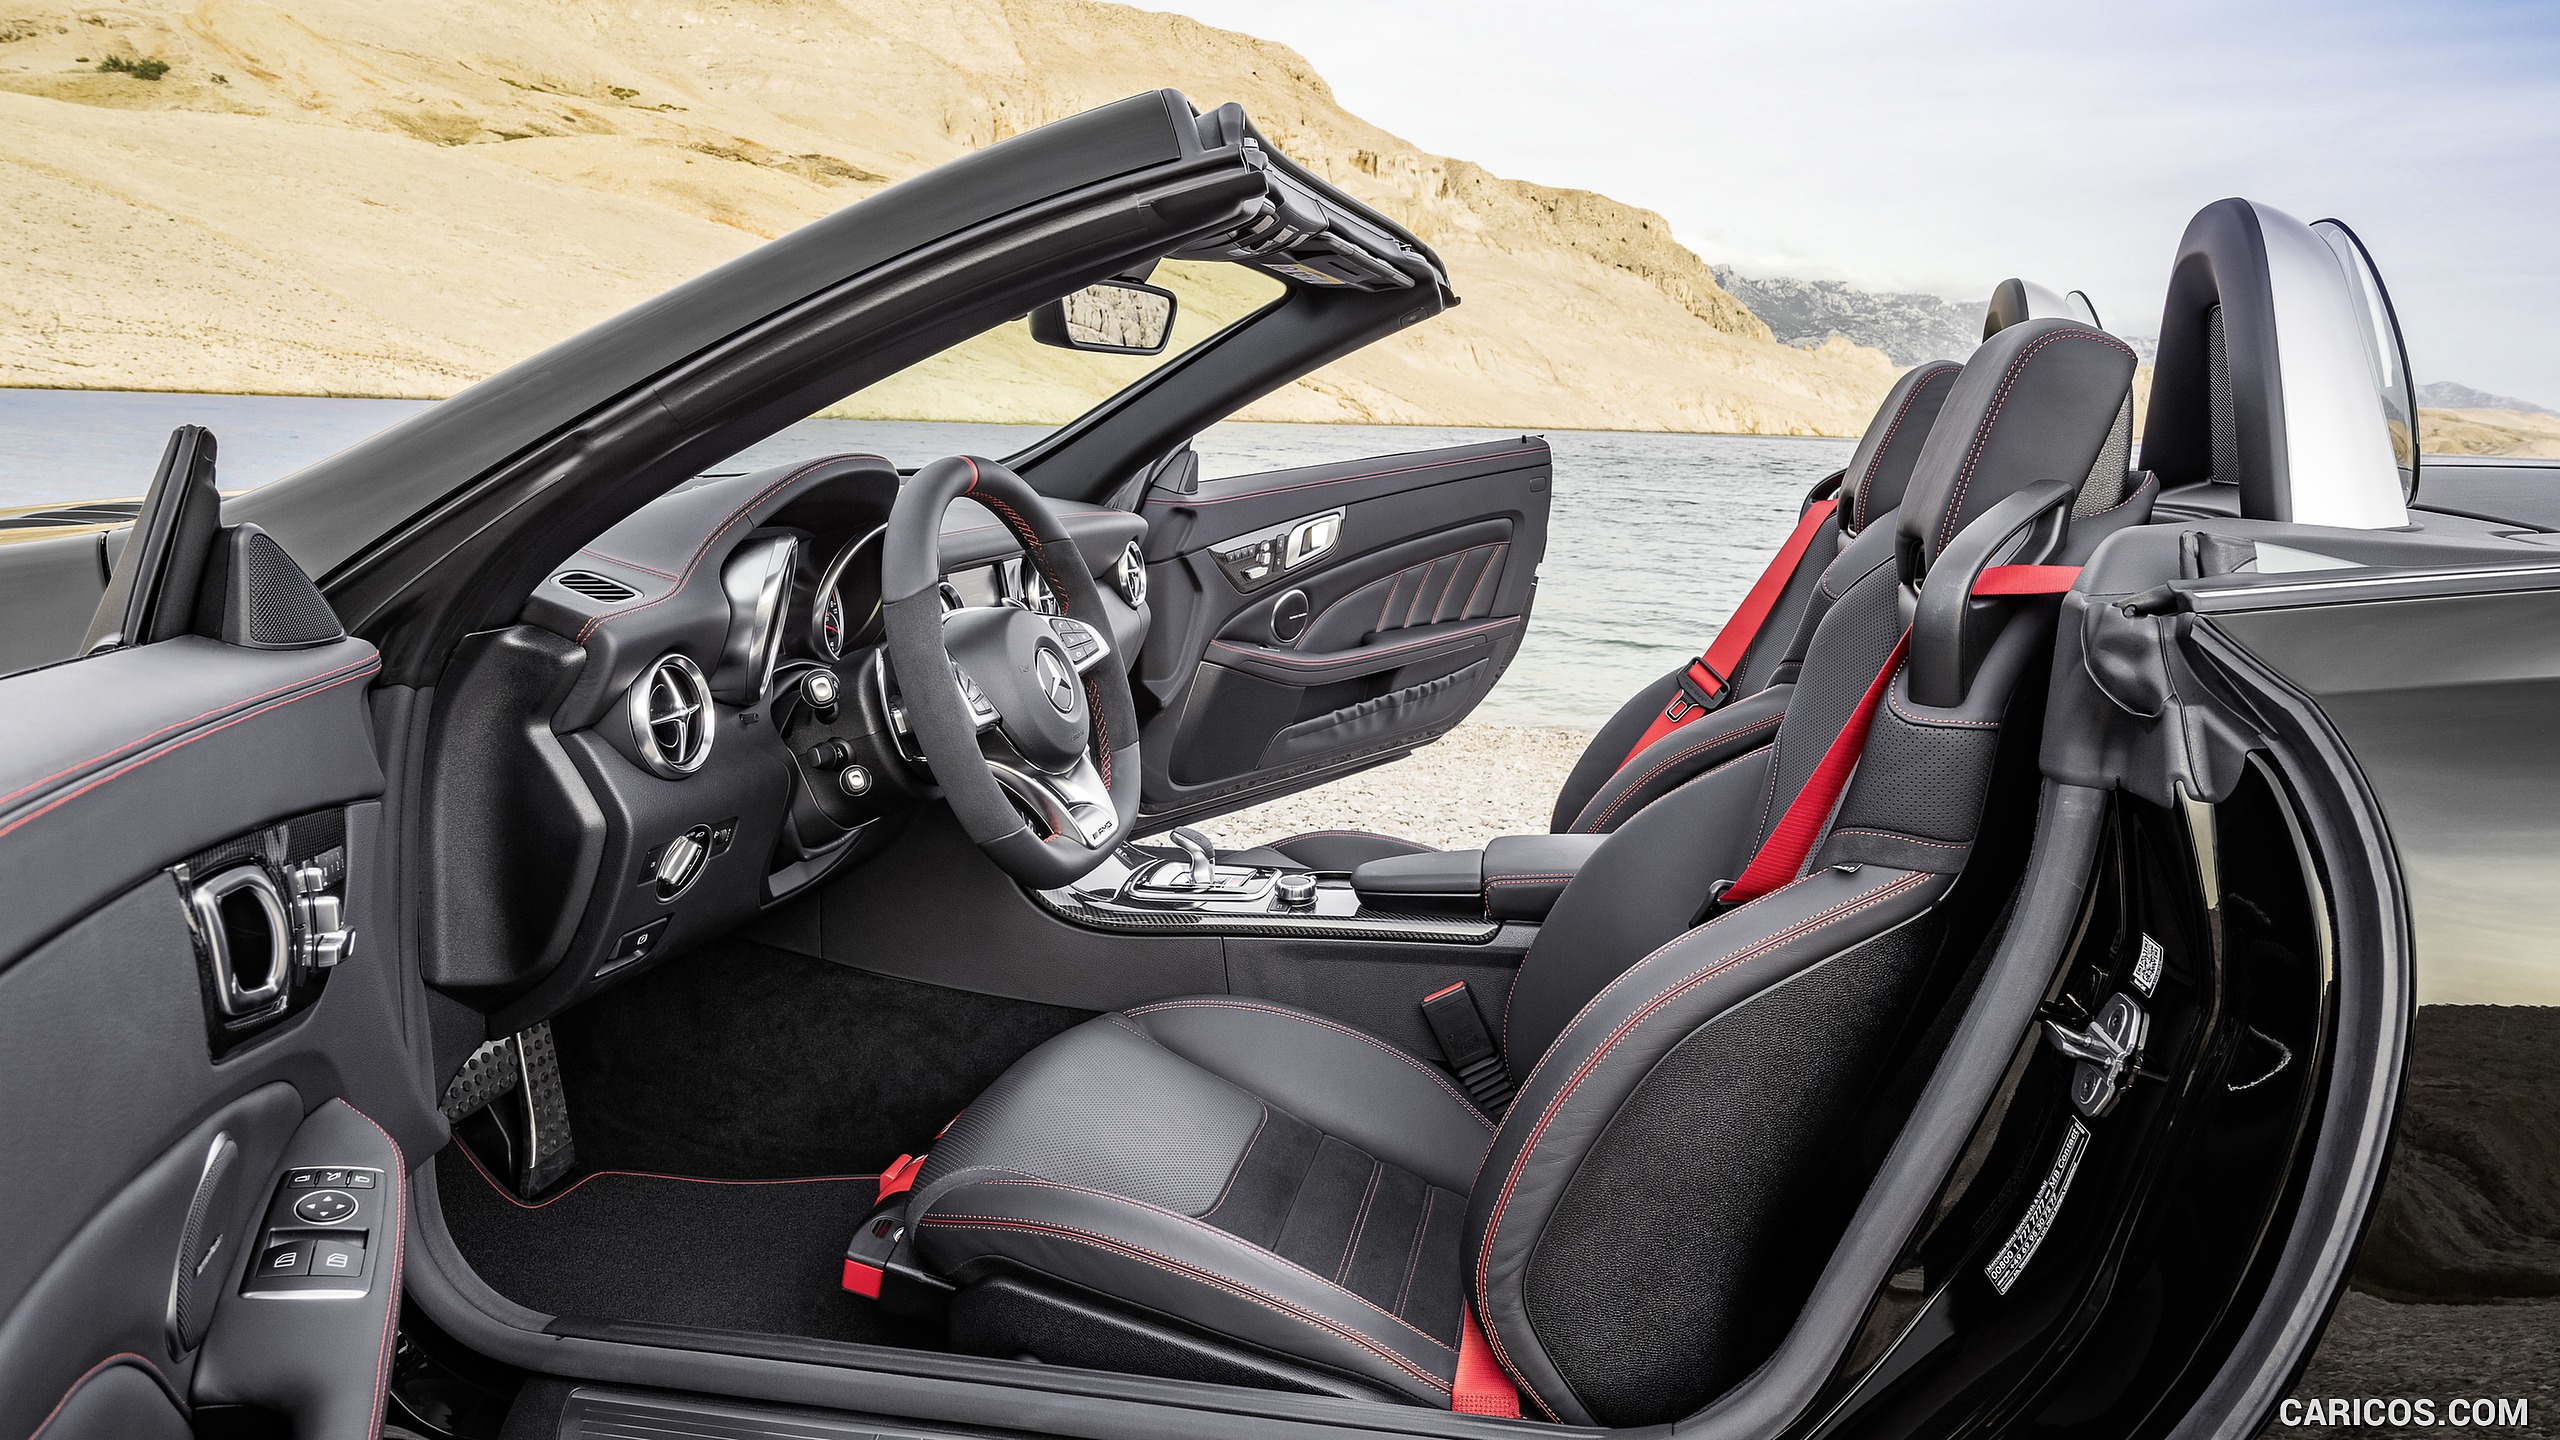 2017 Mercedes-AMG SLC 43 - Nappa Leather Interior with Red Topstiching - Interior, #18 of 92